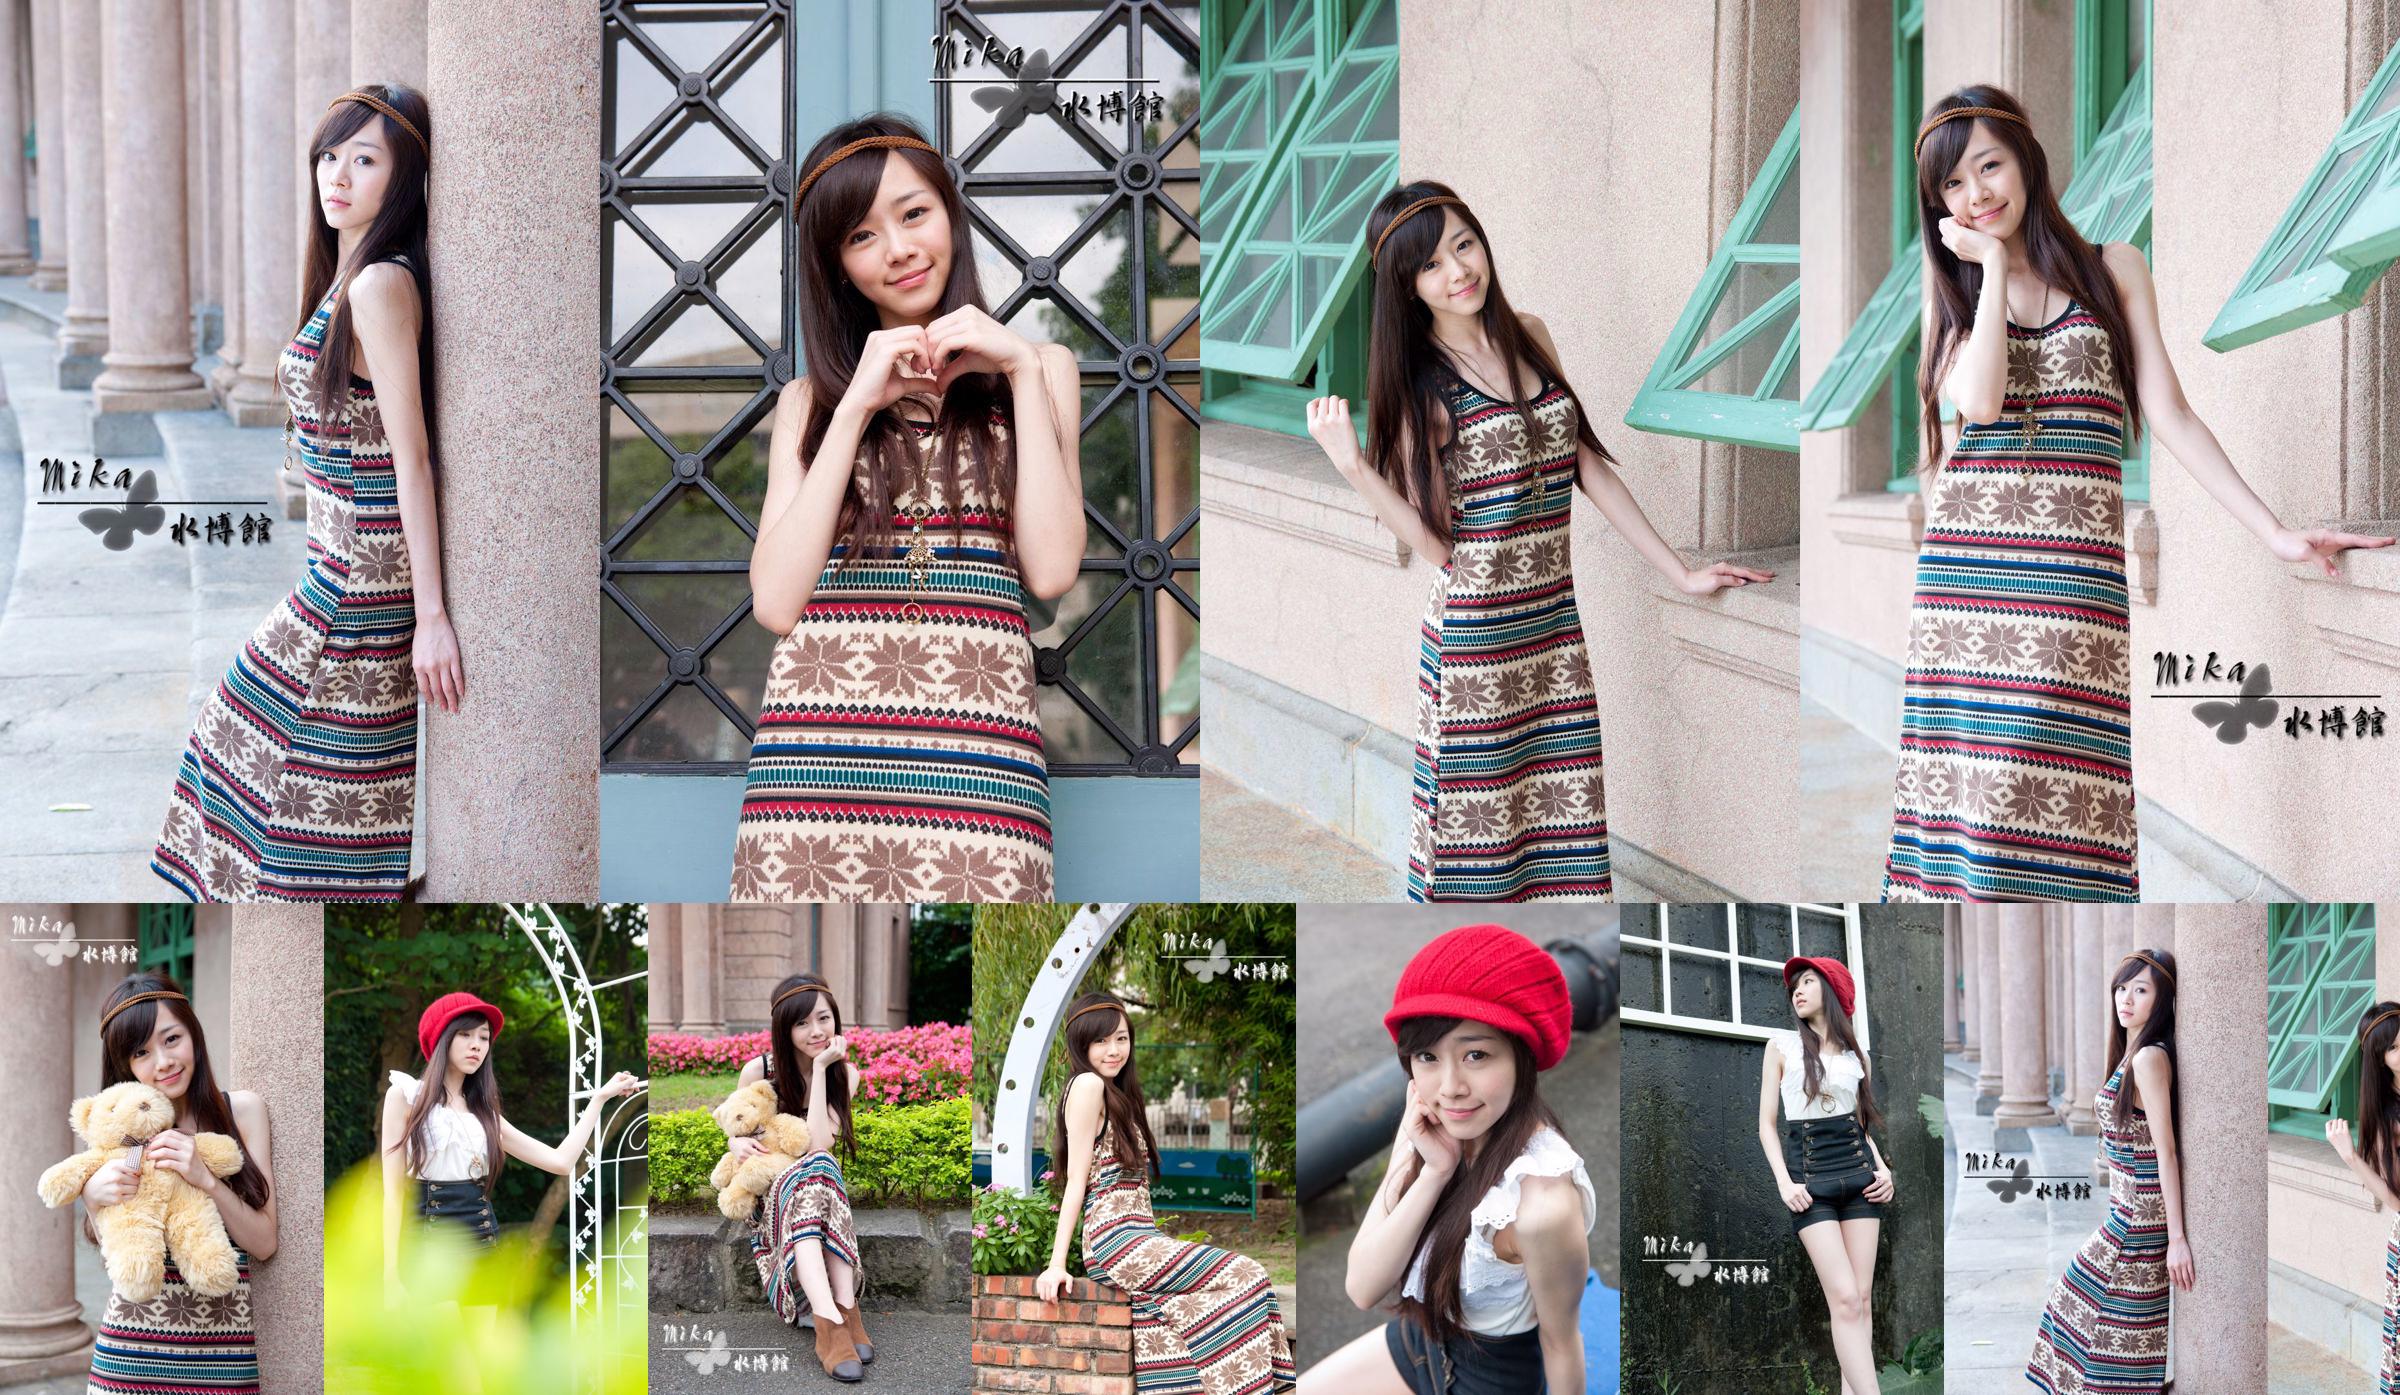 Taiwan's pure and pure sister Mika "Water Pipe Street Shooting" No.490d3f Page 1